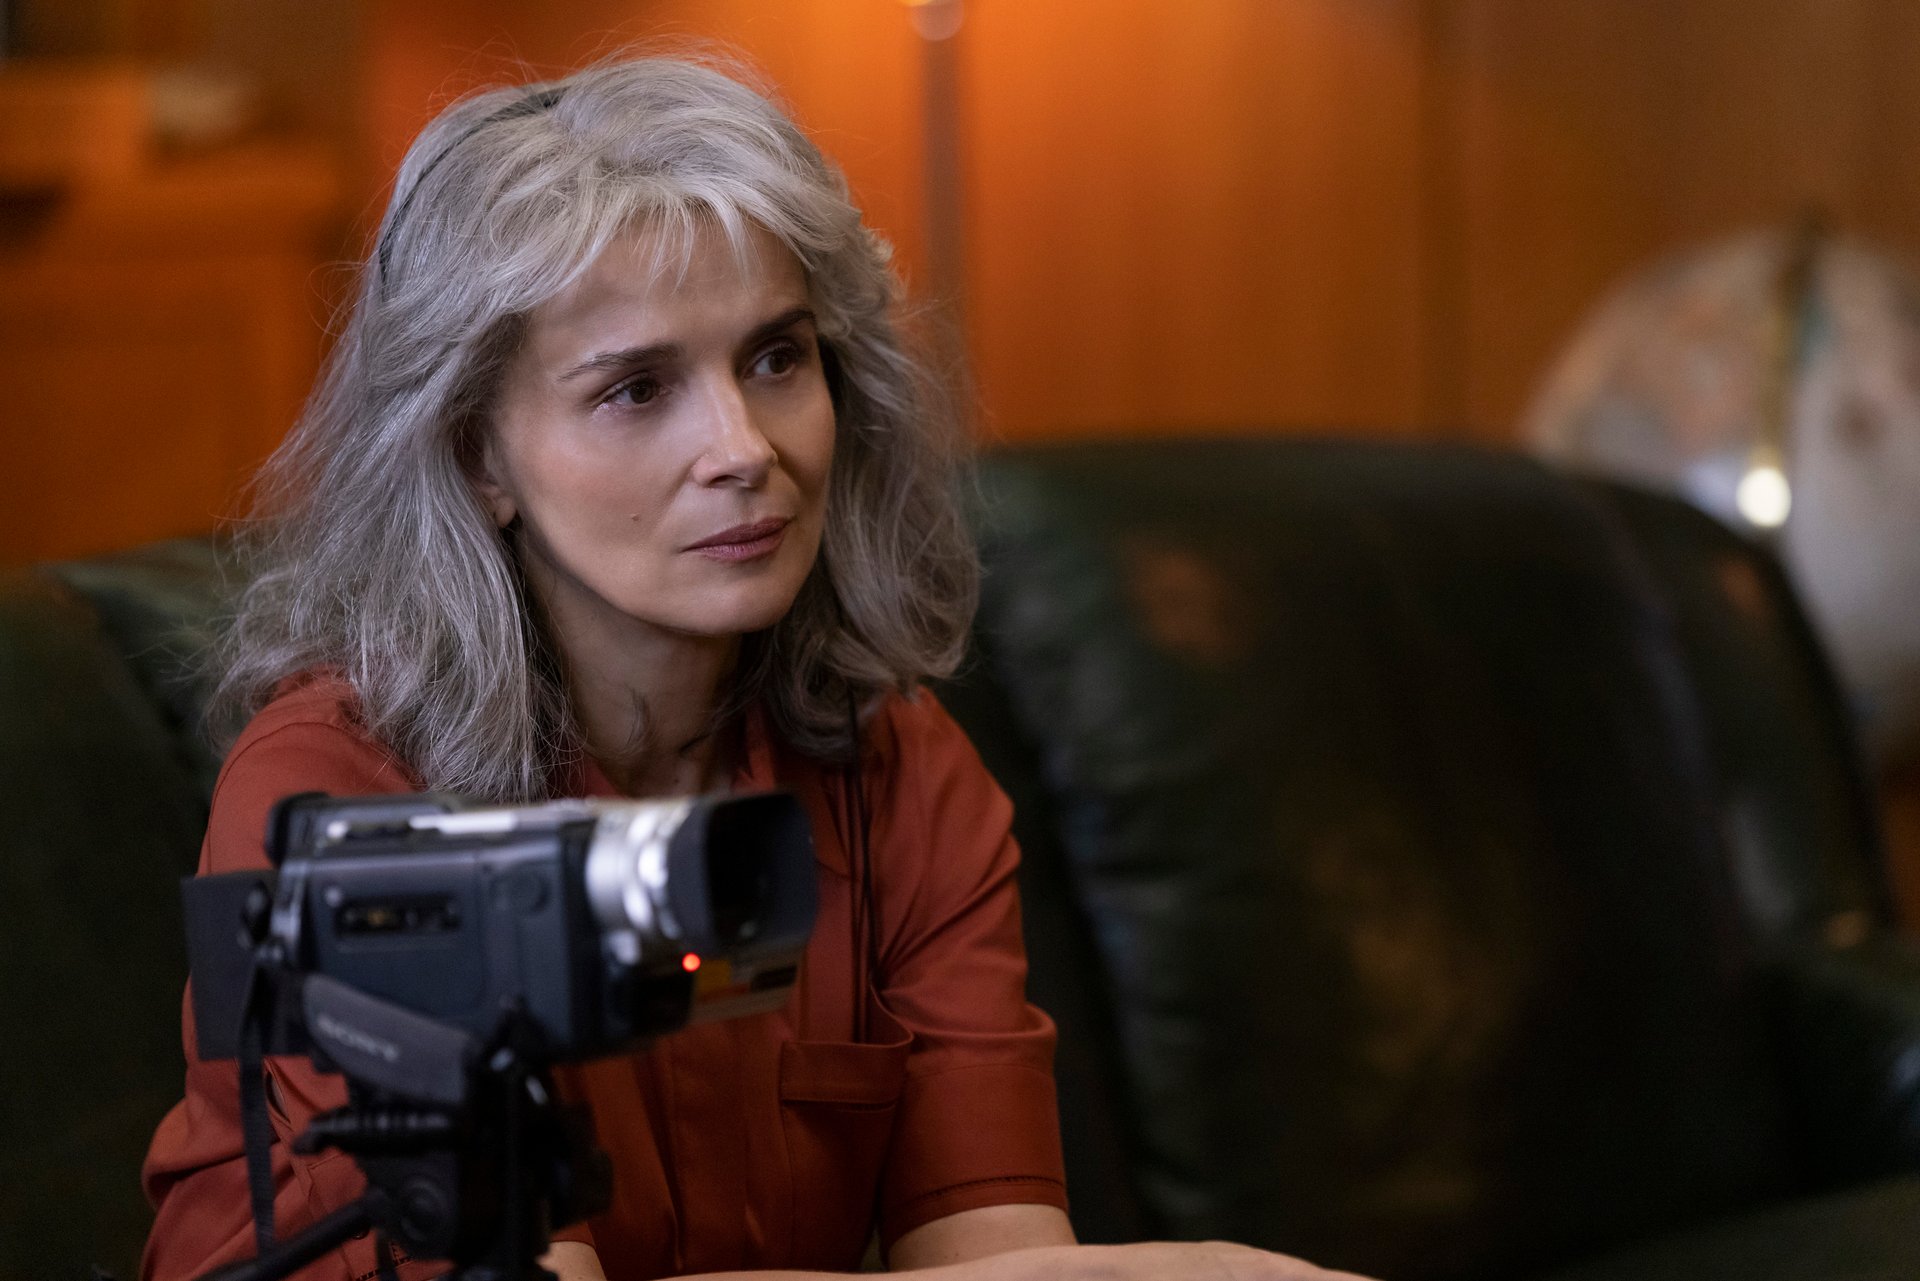 Sophie Brunet (Juliette Binoche) sits with a camera in 'The Staircase' on HBO Max